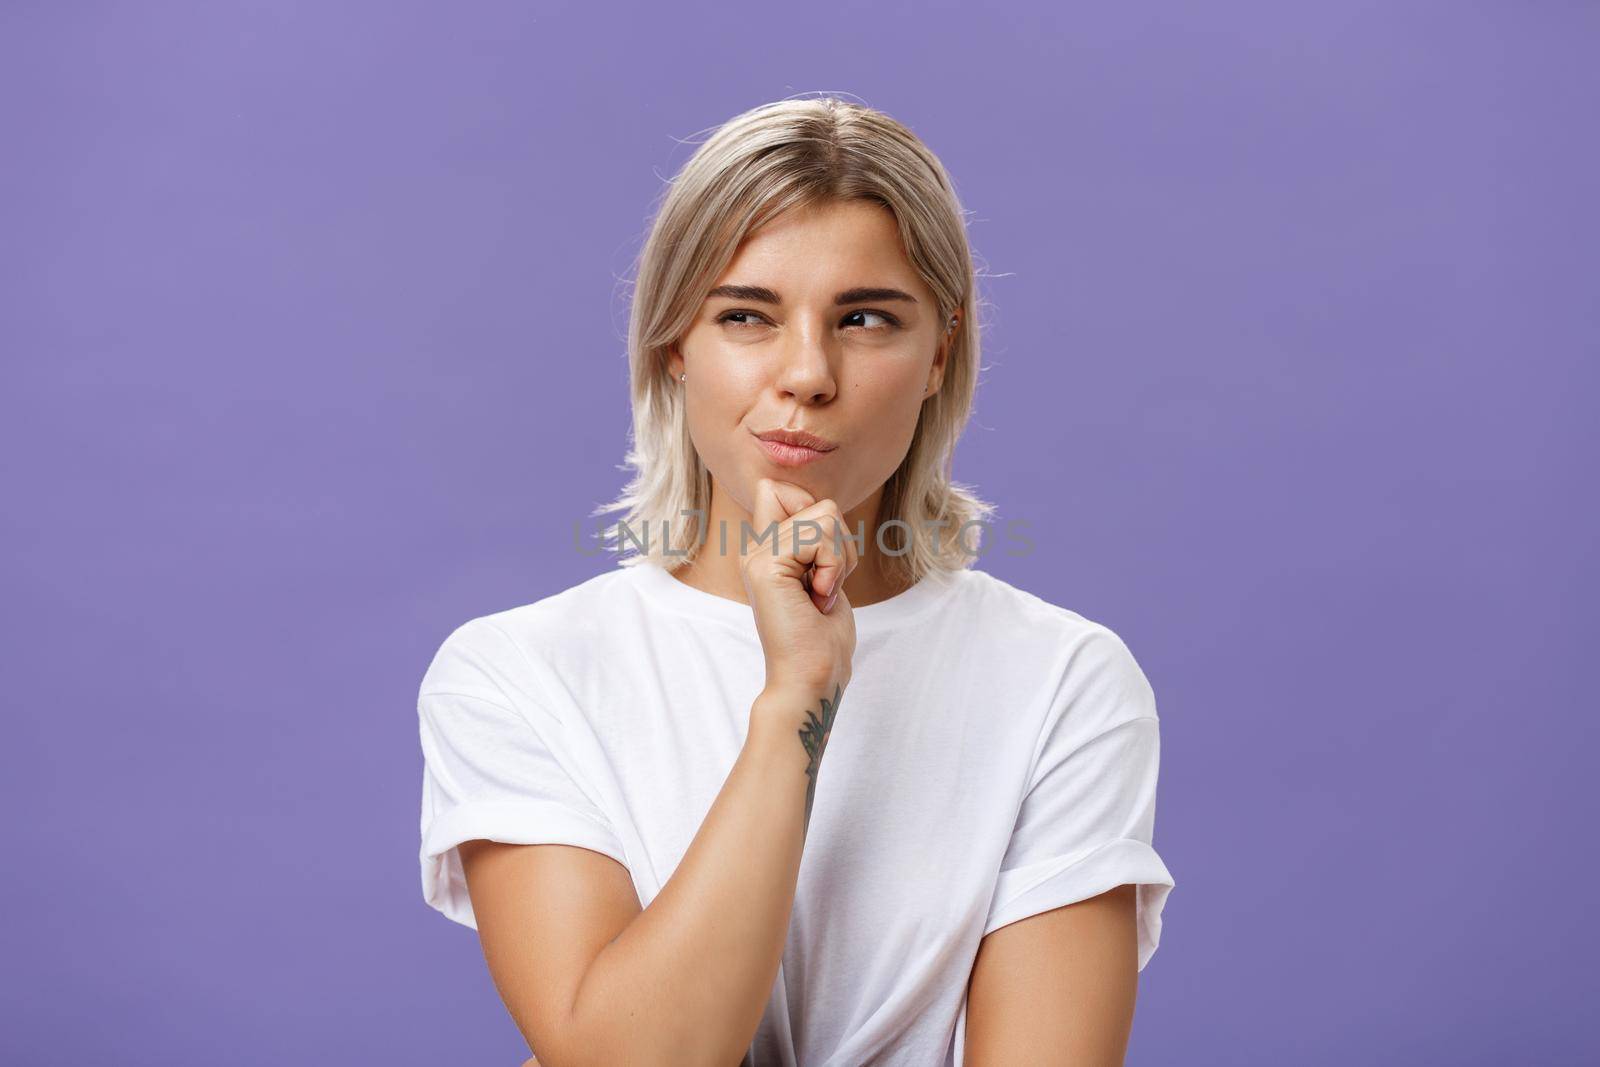 Waist-up shot of smart creative young ambitious woman with blond haircut and tanned skin squinting and smirking gazing left while holding hand on chin thinking making up plan or decision. Copy space